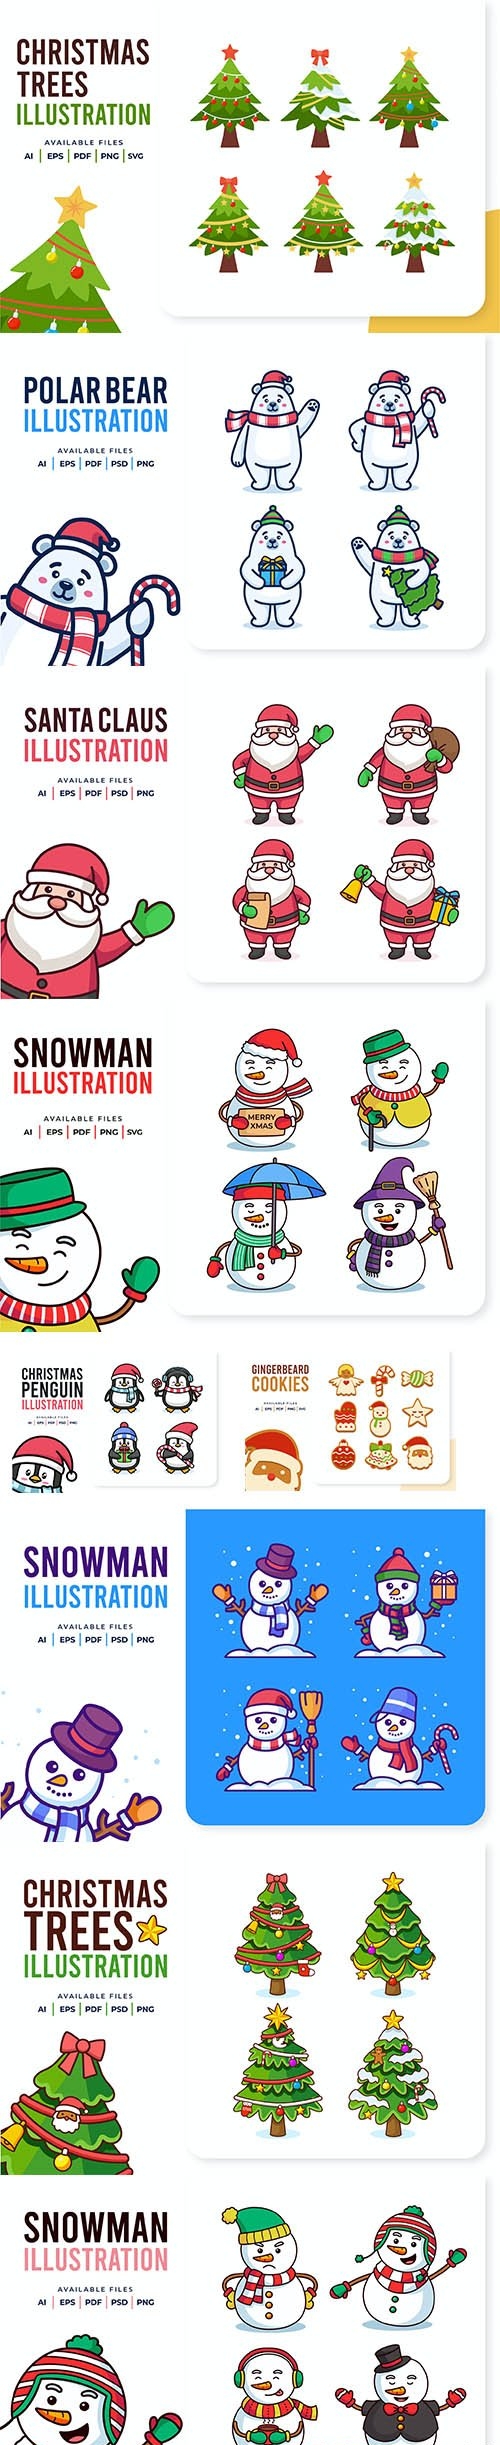 Christmas Collection of Santa Claus, Snowman and trees